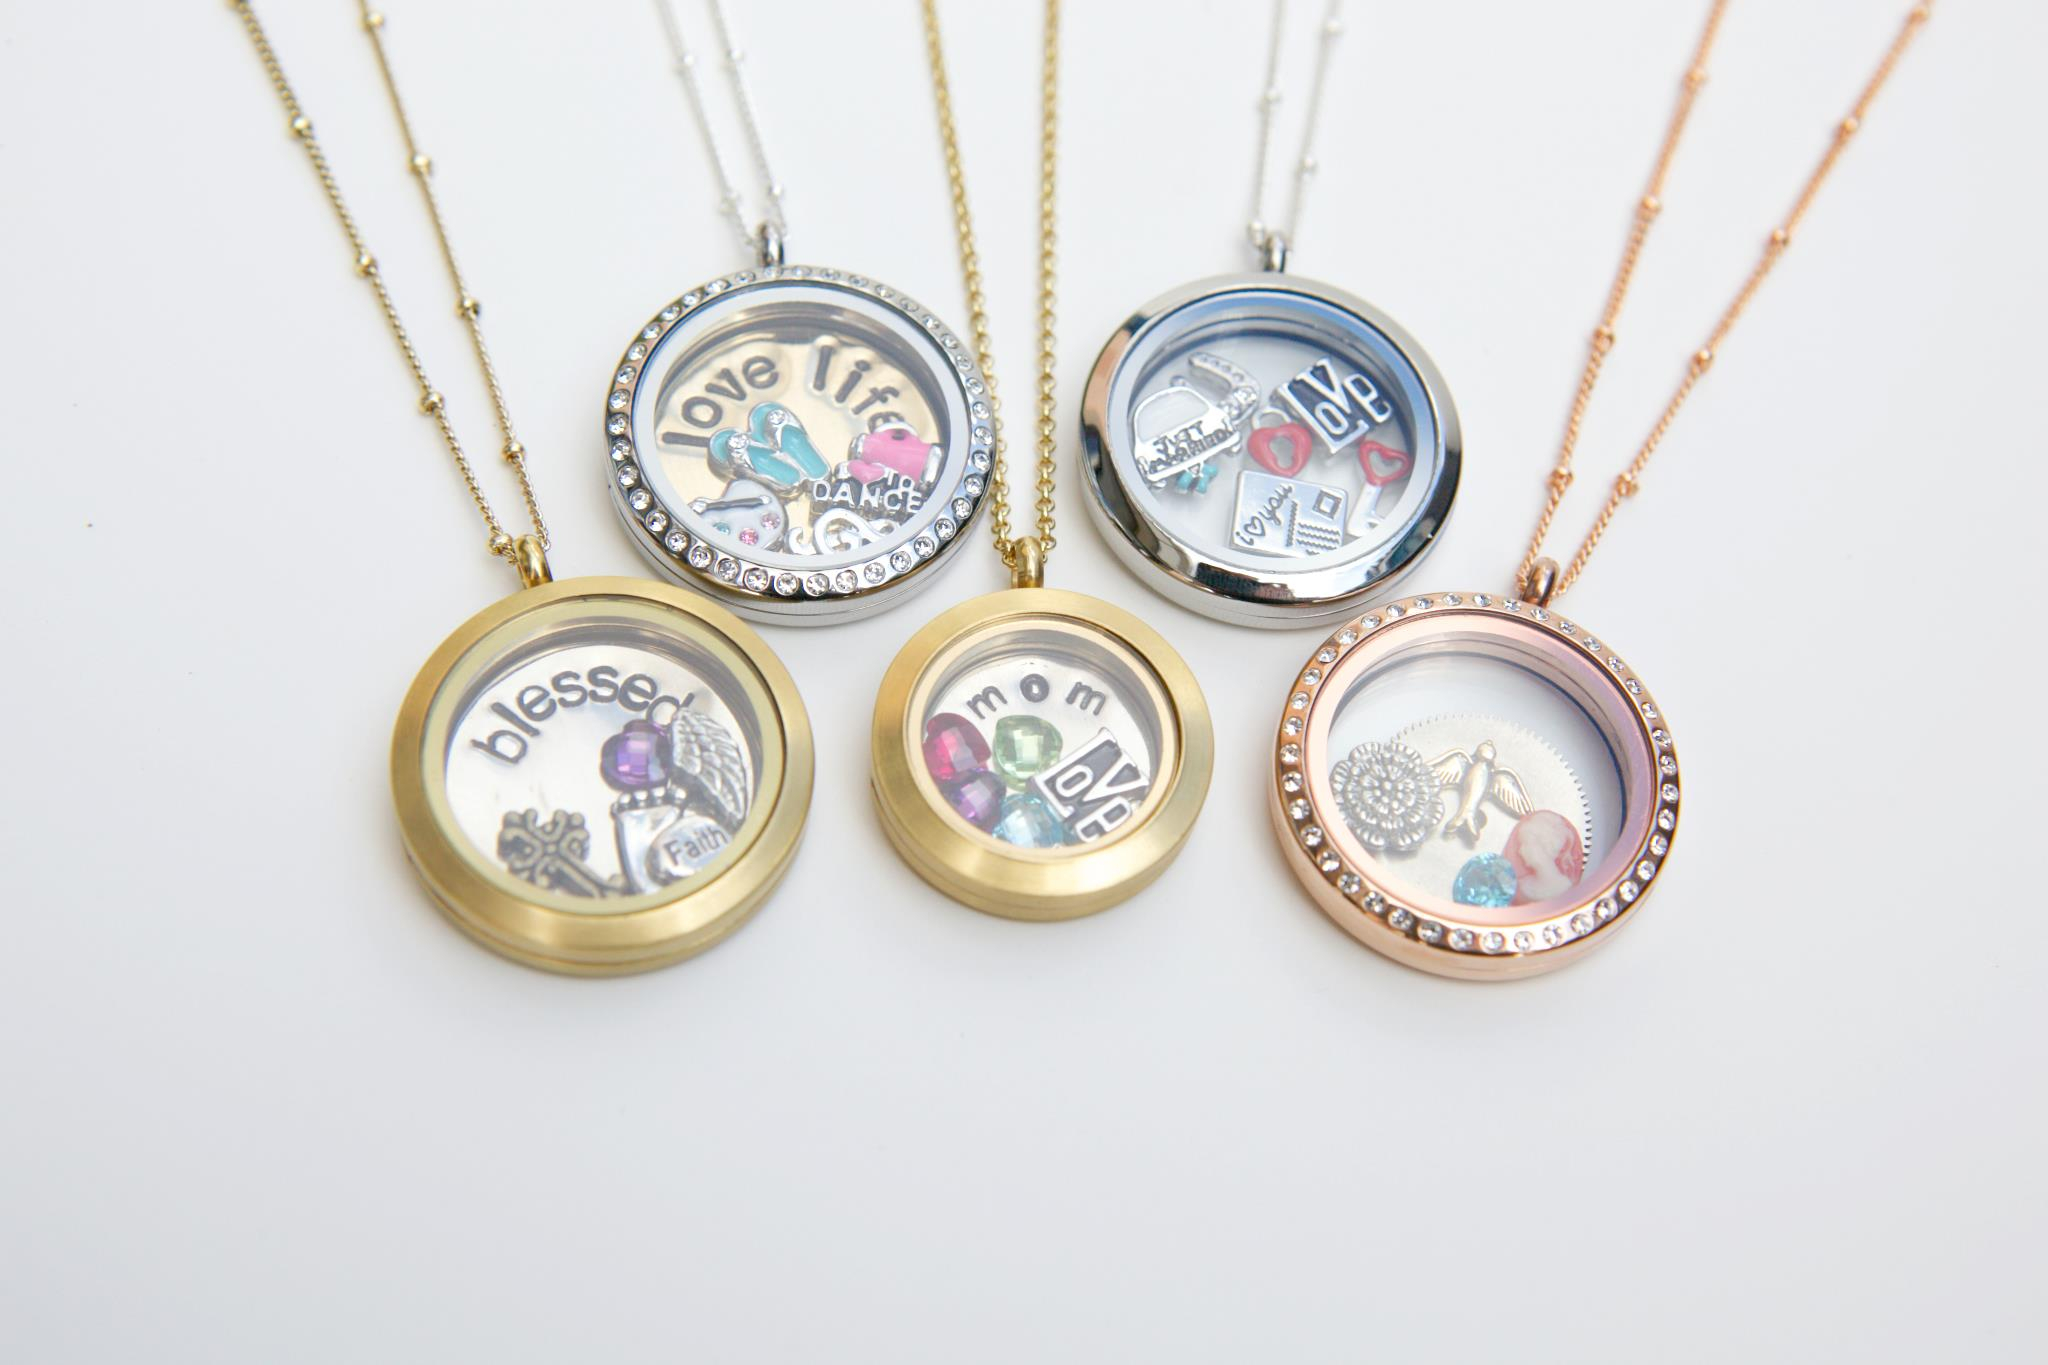 Owl Origami Necklace Buy Origami Owl Jewelry Online Charms Necklace Products